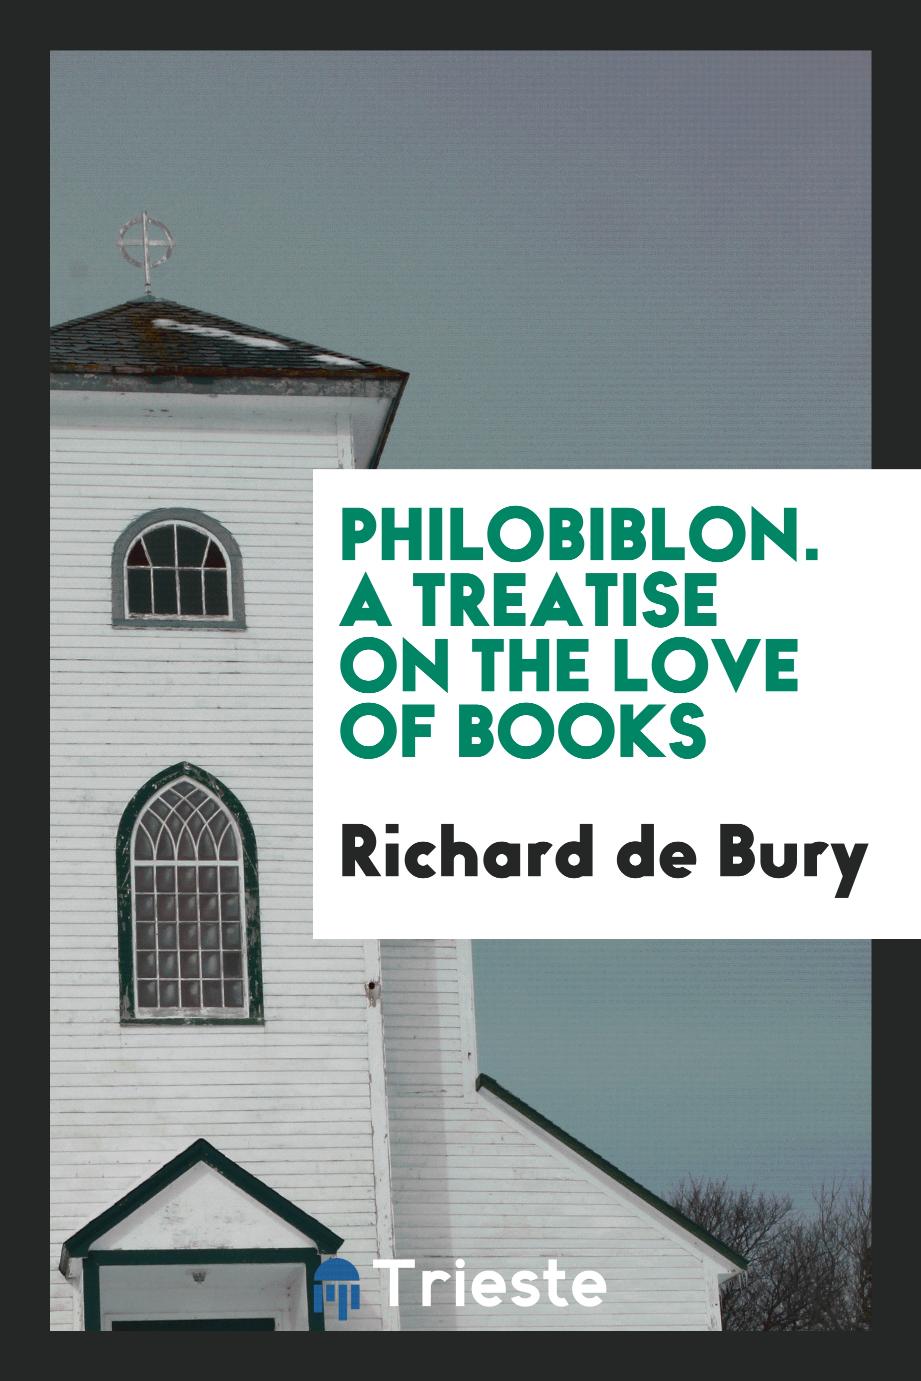 Philobiblon. A treatise on the love of books